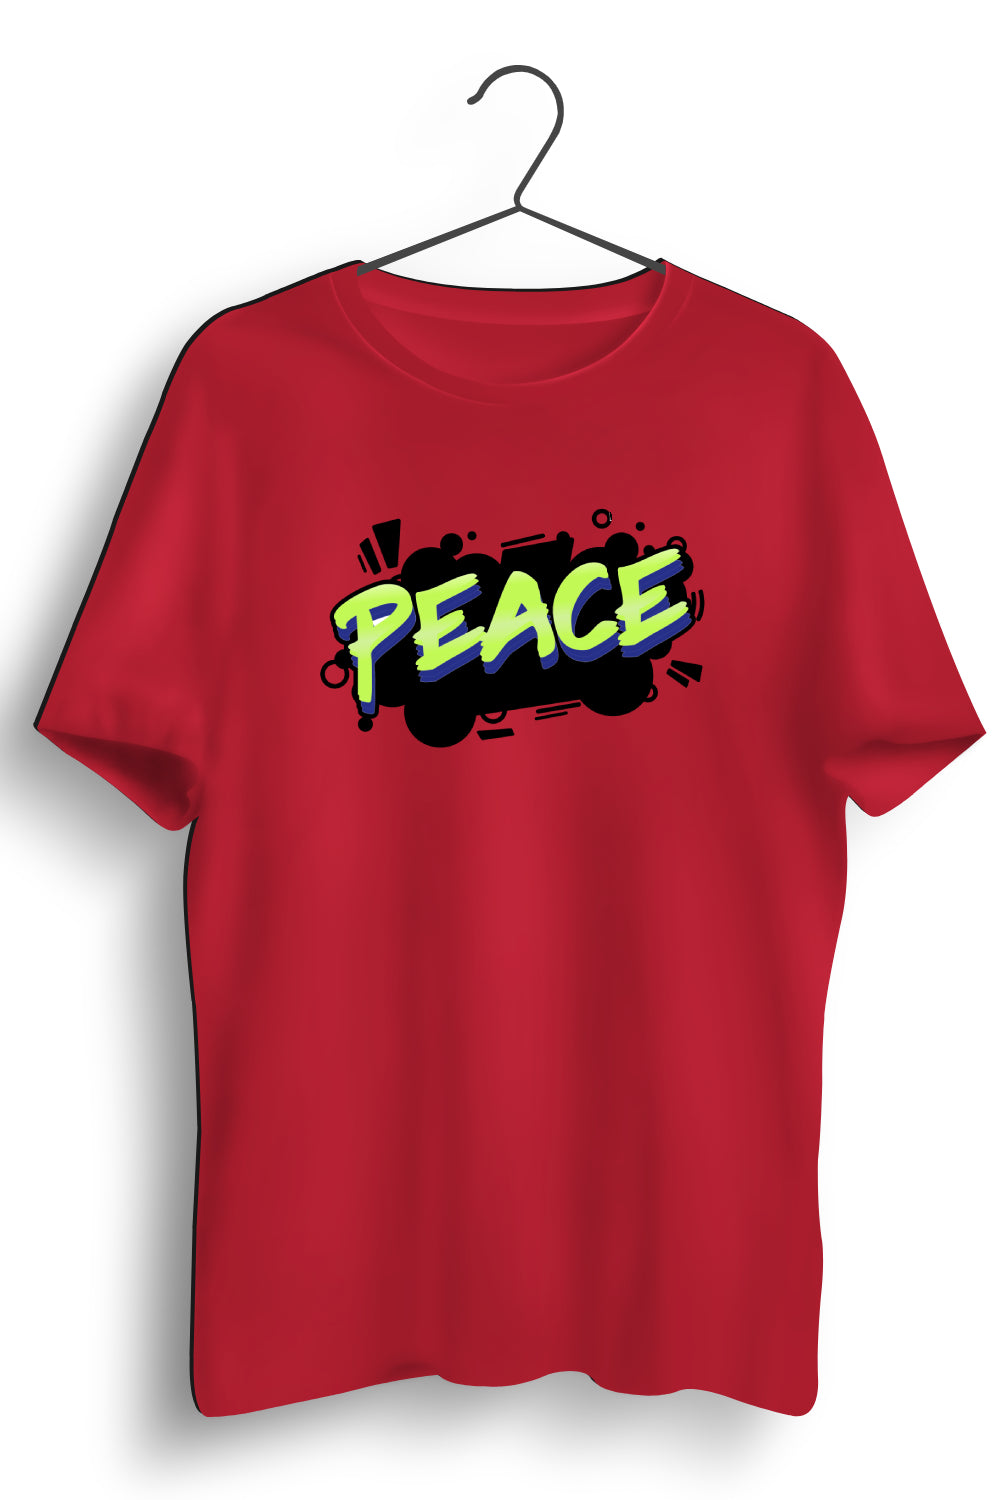 Peace Graphic Printed Red Tshirt